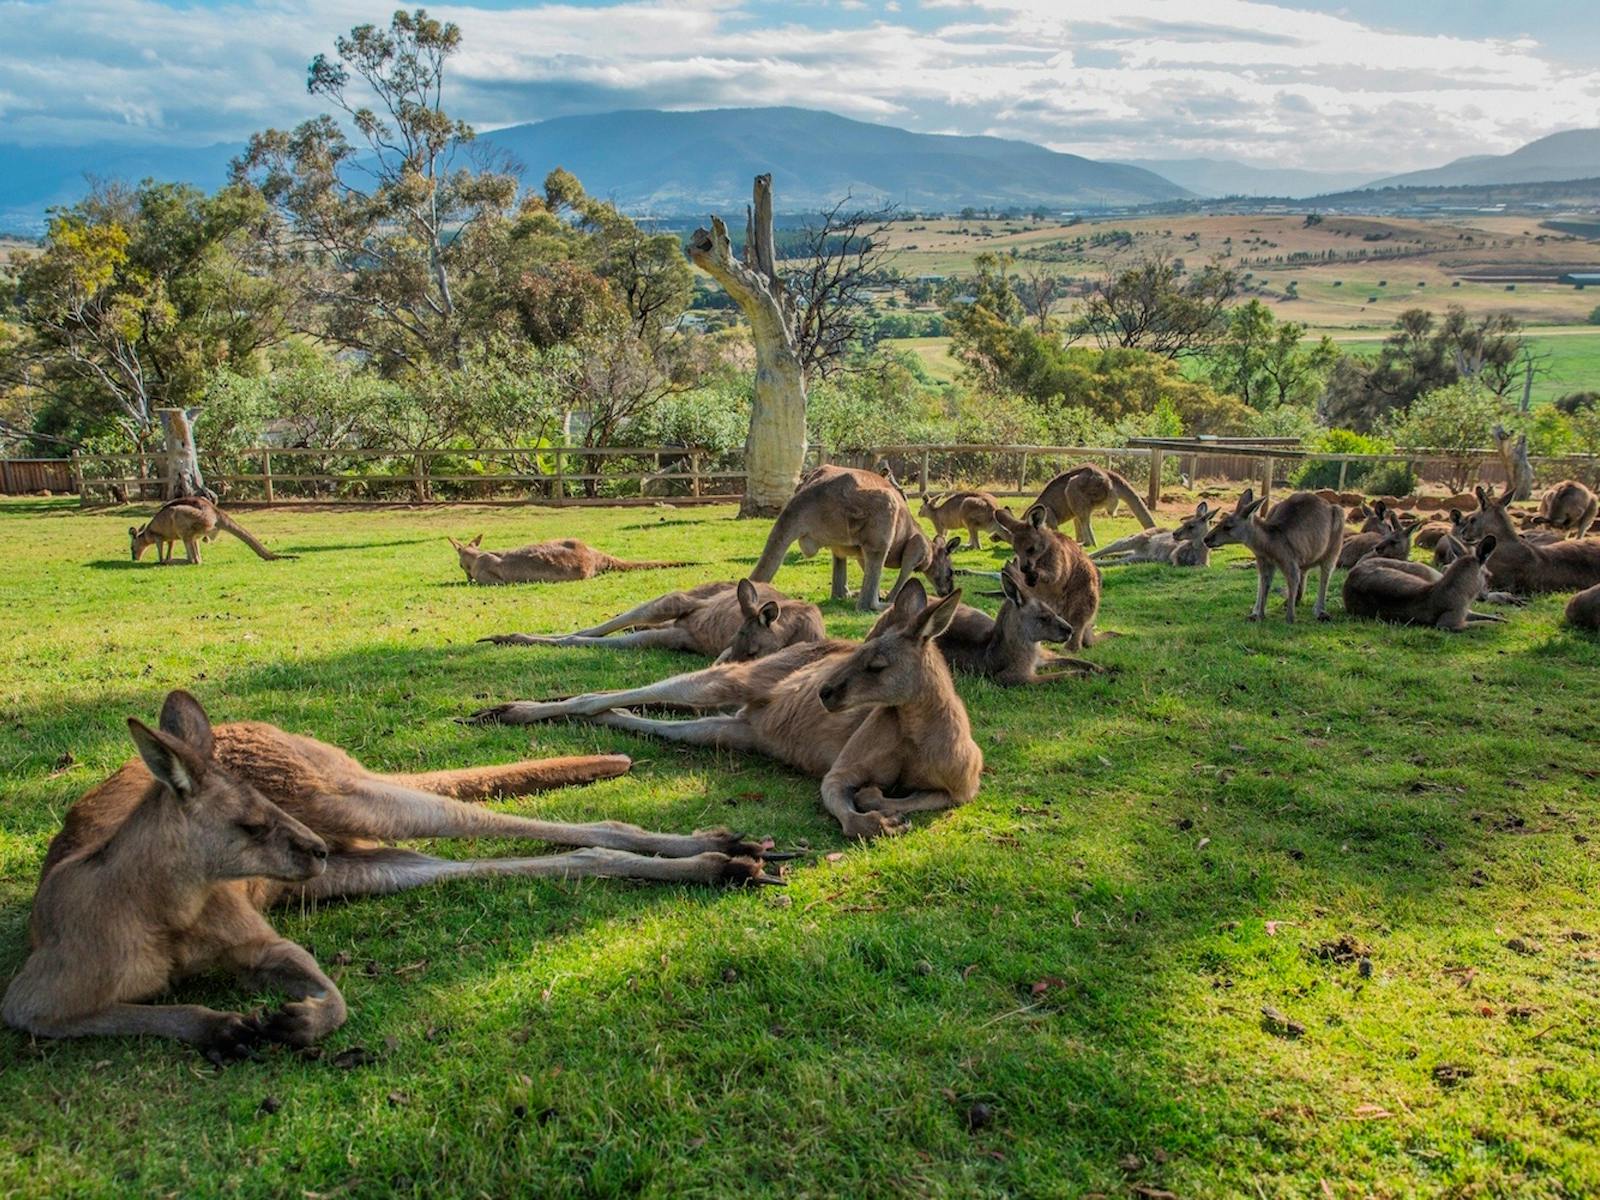 Kangaroos relaxing on the grass at Bonorong Wildlife Sanctuary to a backdrop of valley and mountains